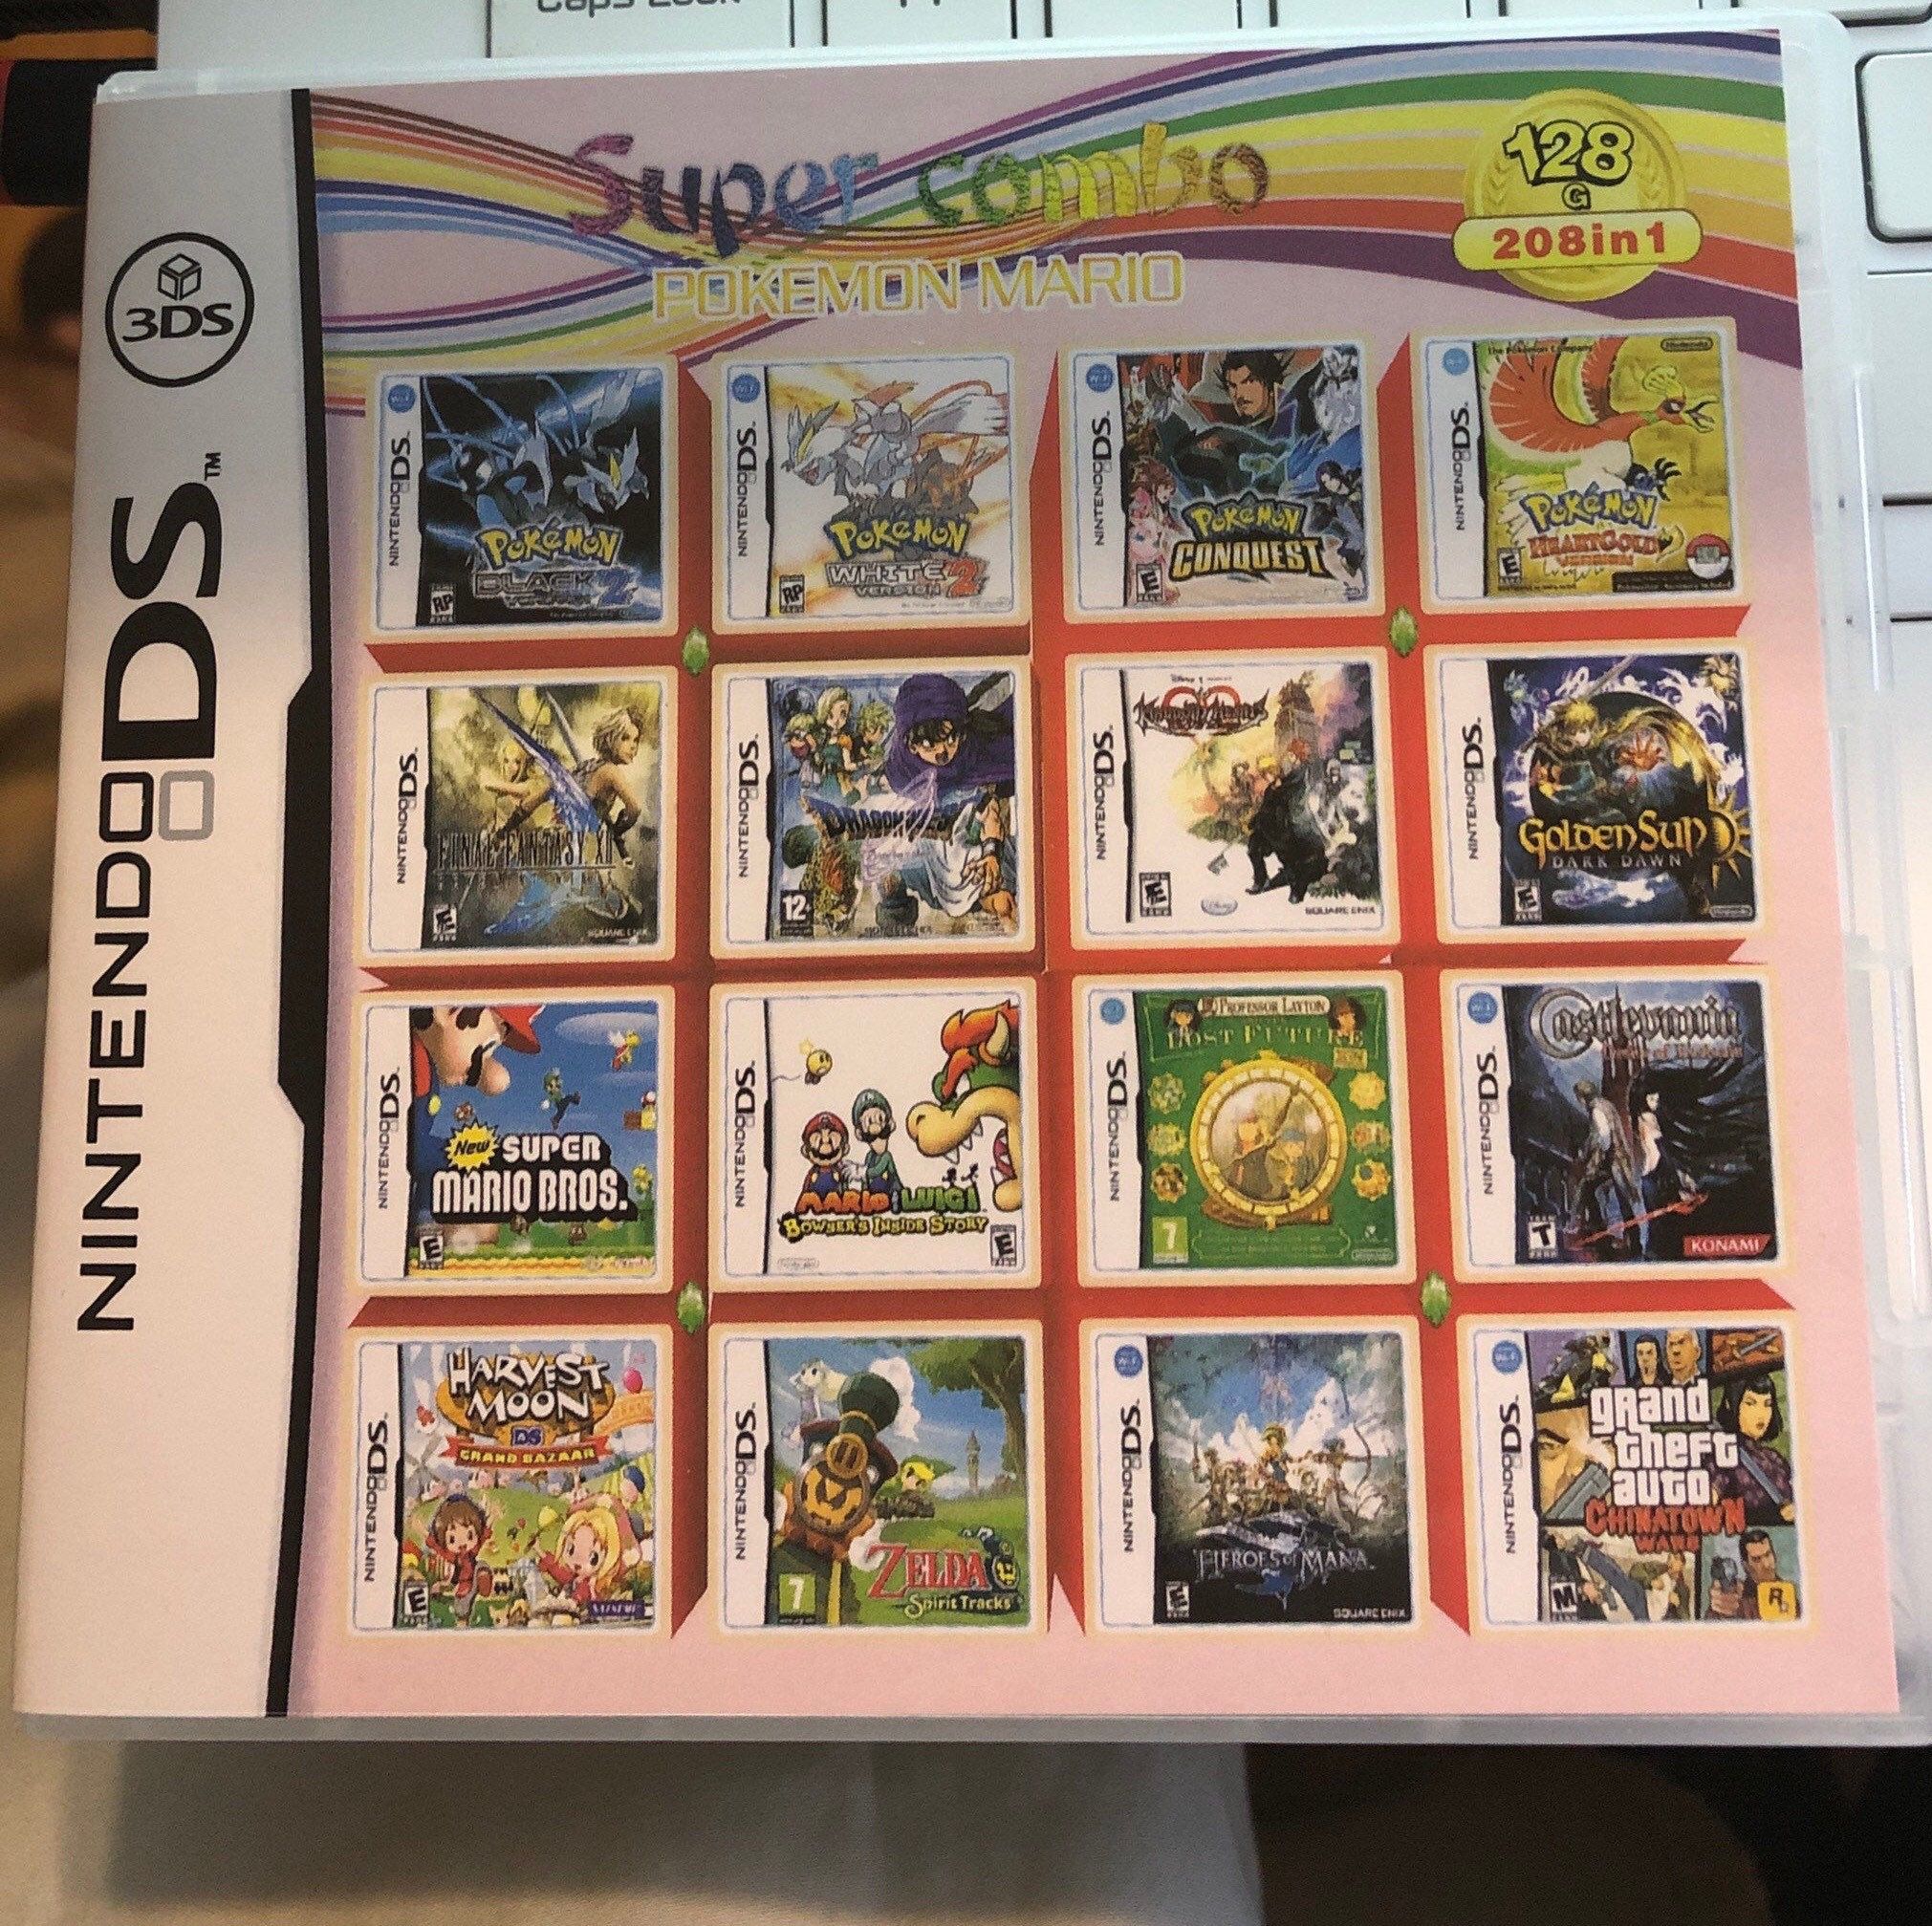 Nintendo Ds Nds 208 In 1